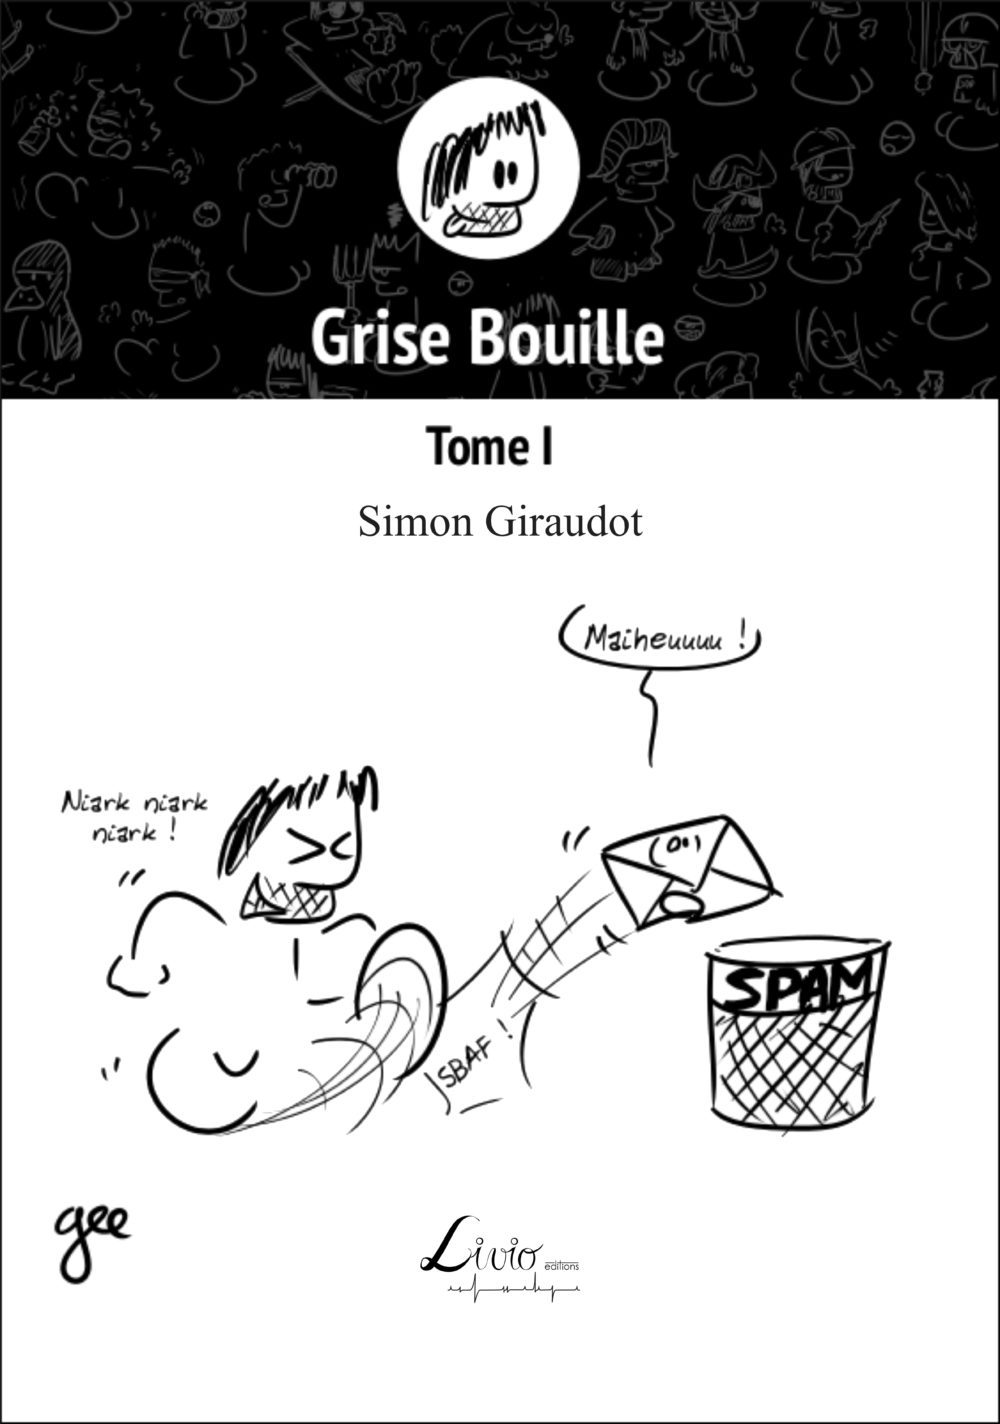 Grise Bouille – Tome I